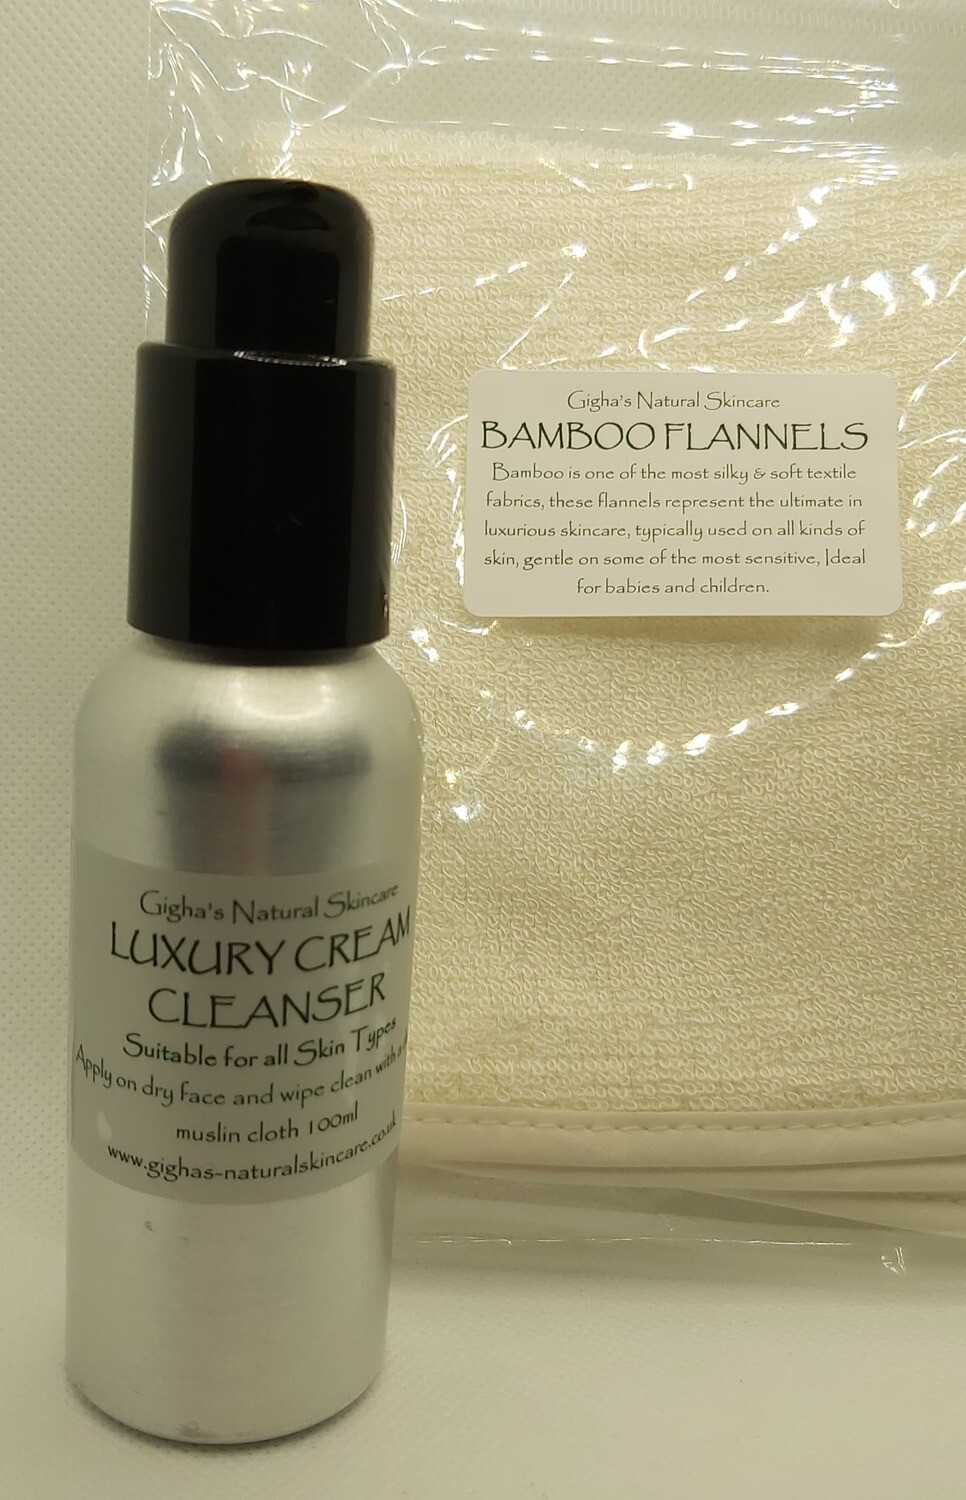 Luxury Cream Cleanser and Bamboo cloth